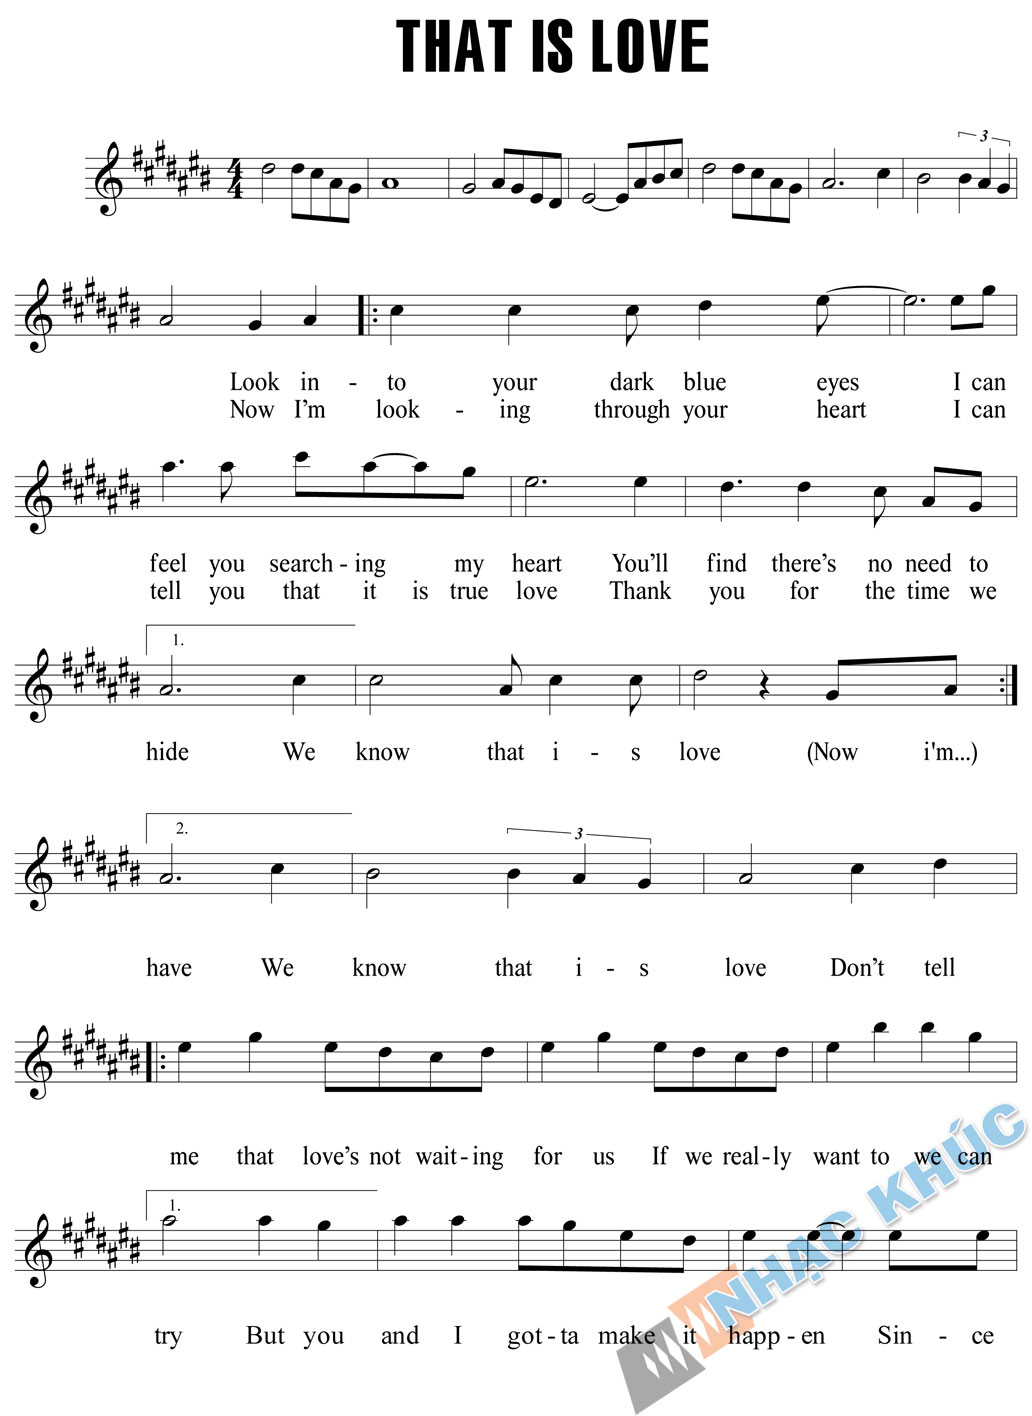 That is love sheet music notes